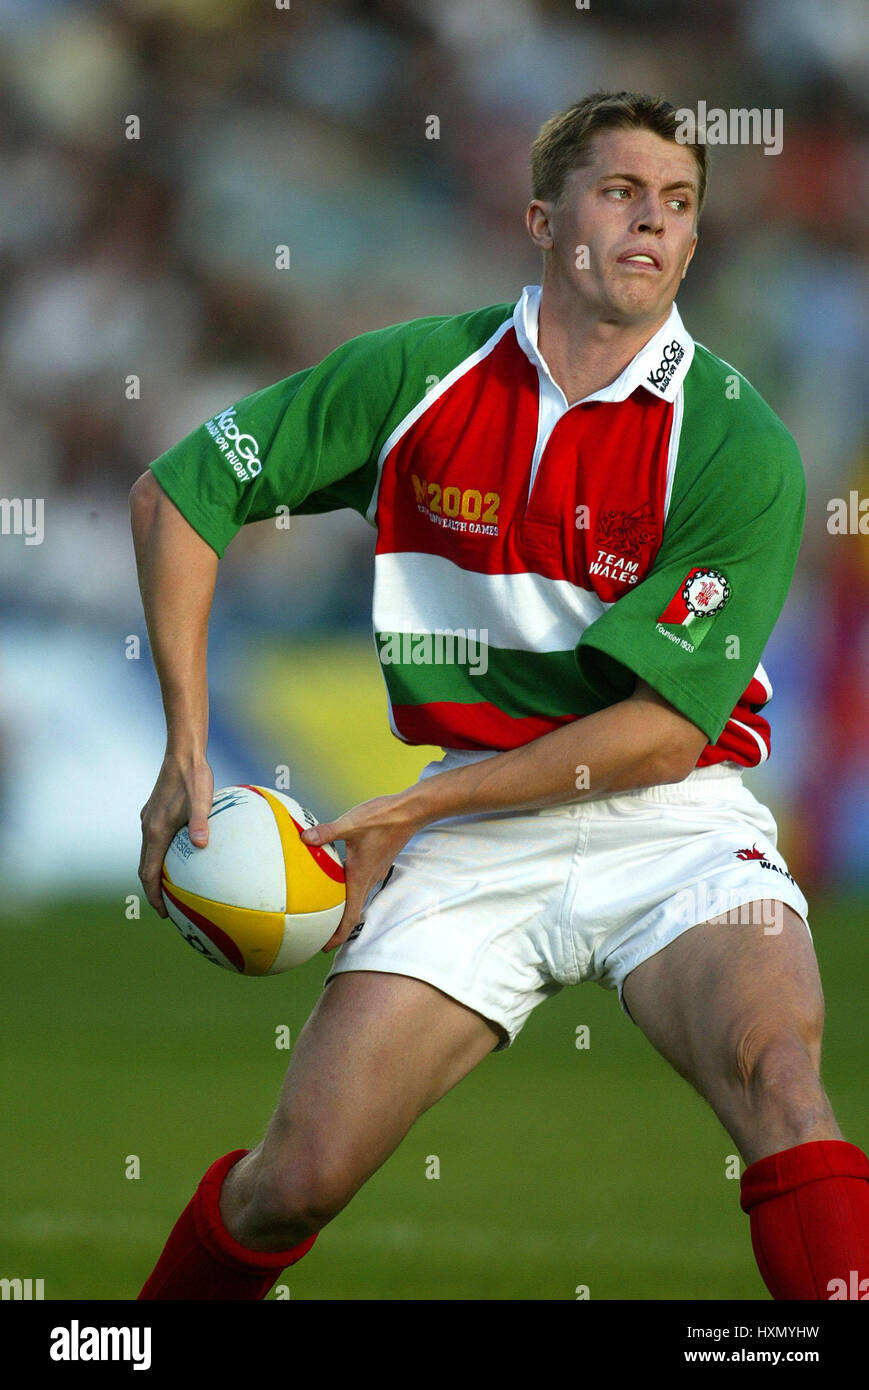 ARWEL CAMBER WALES RU MANCHESTER ENGLAND 3. August 2002 Stockfoto